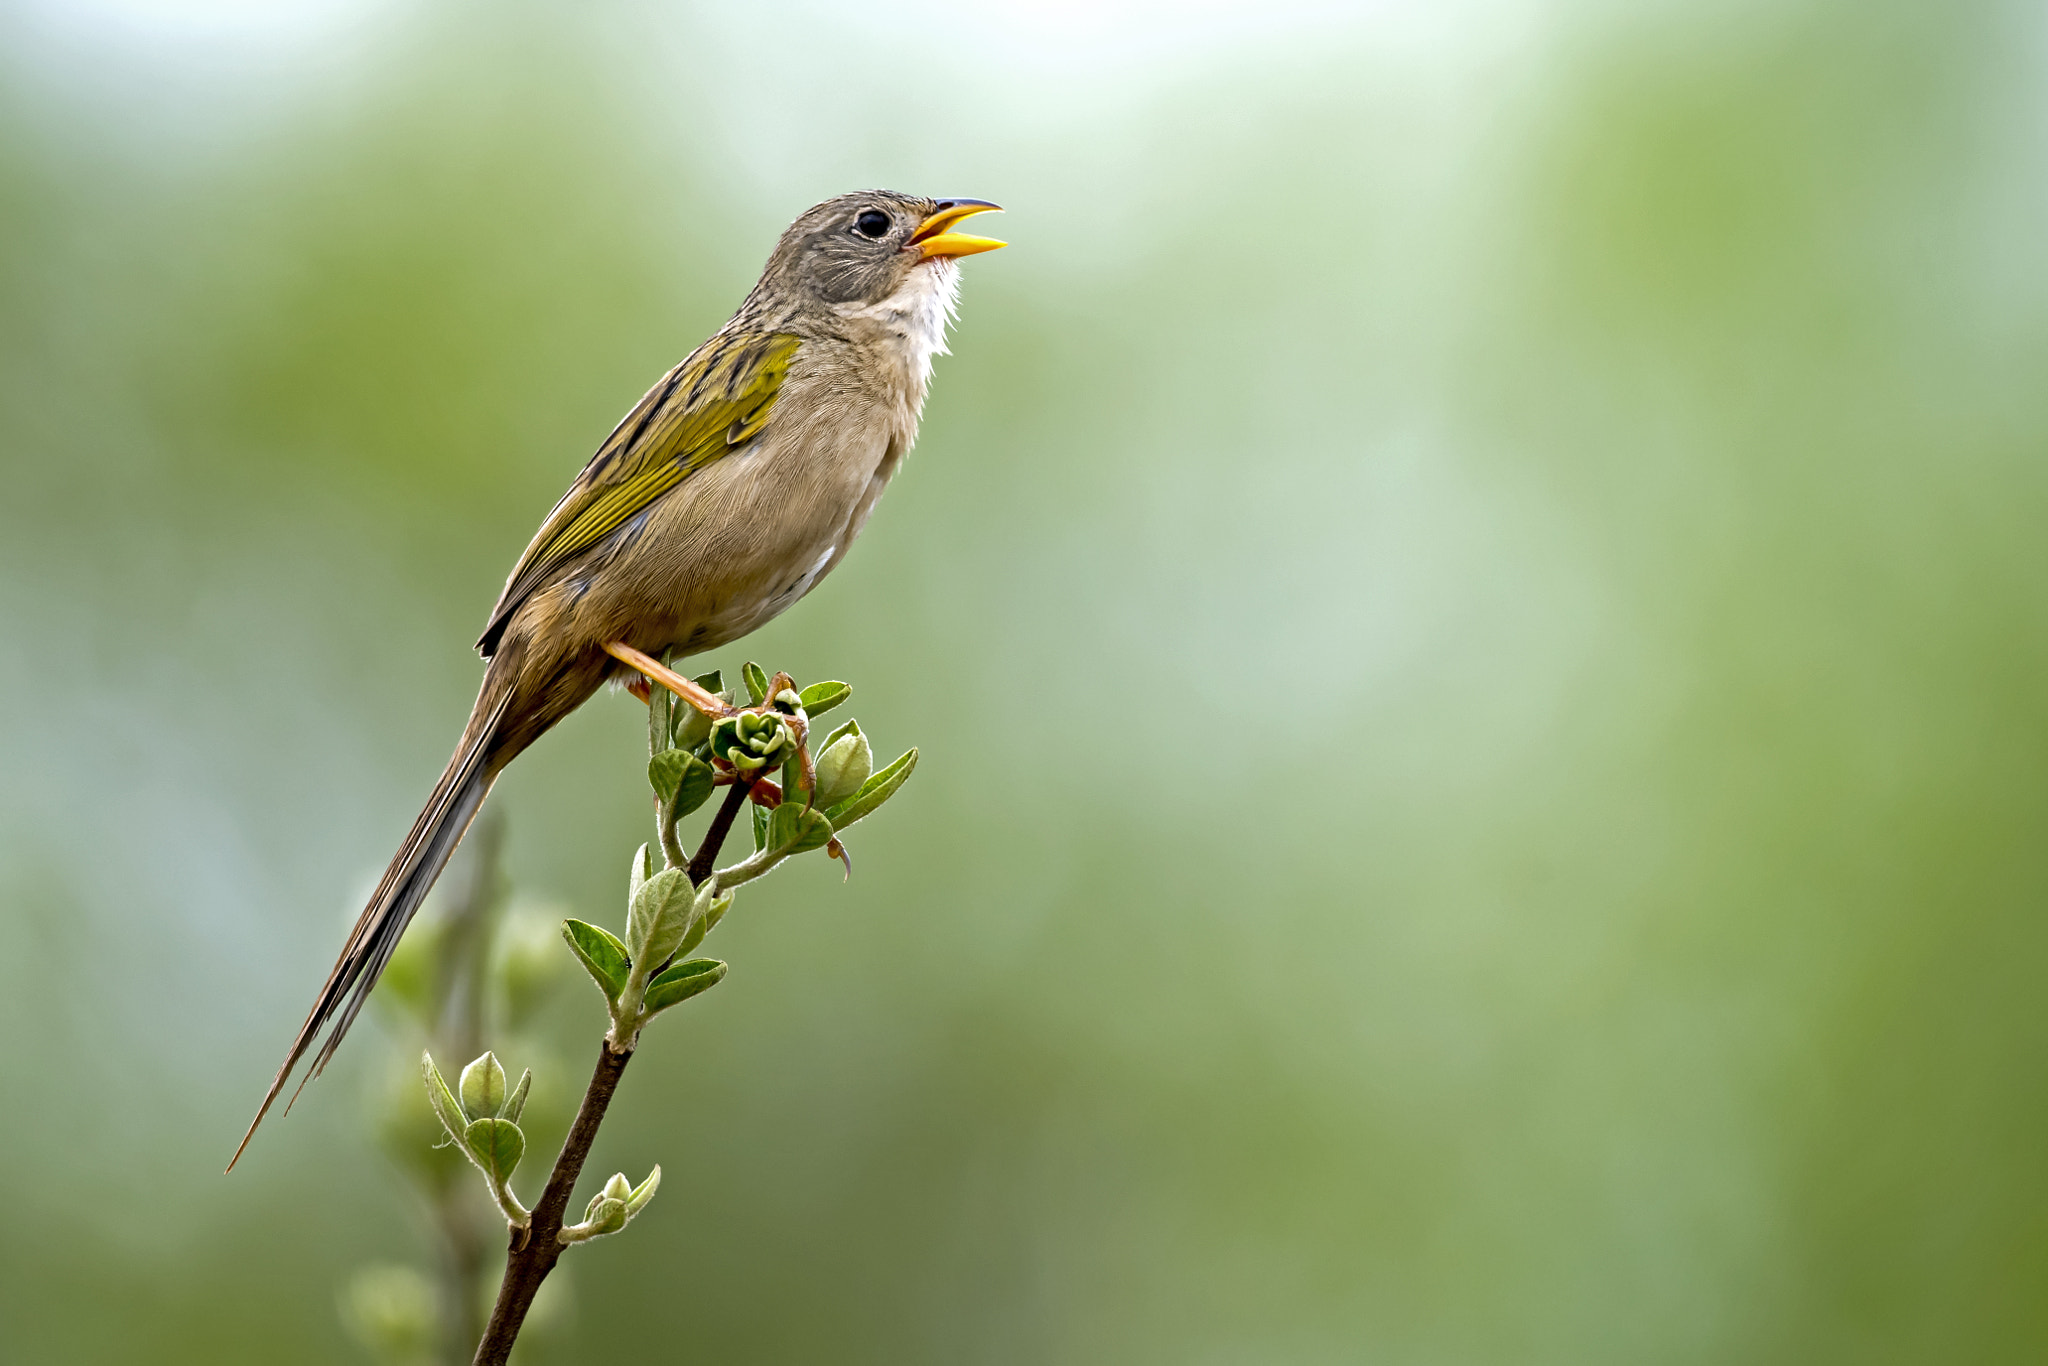 Nikon D5 sample photo. Wedge-tailed grass-finch photography